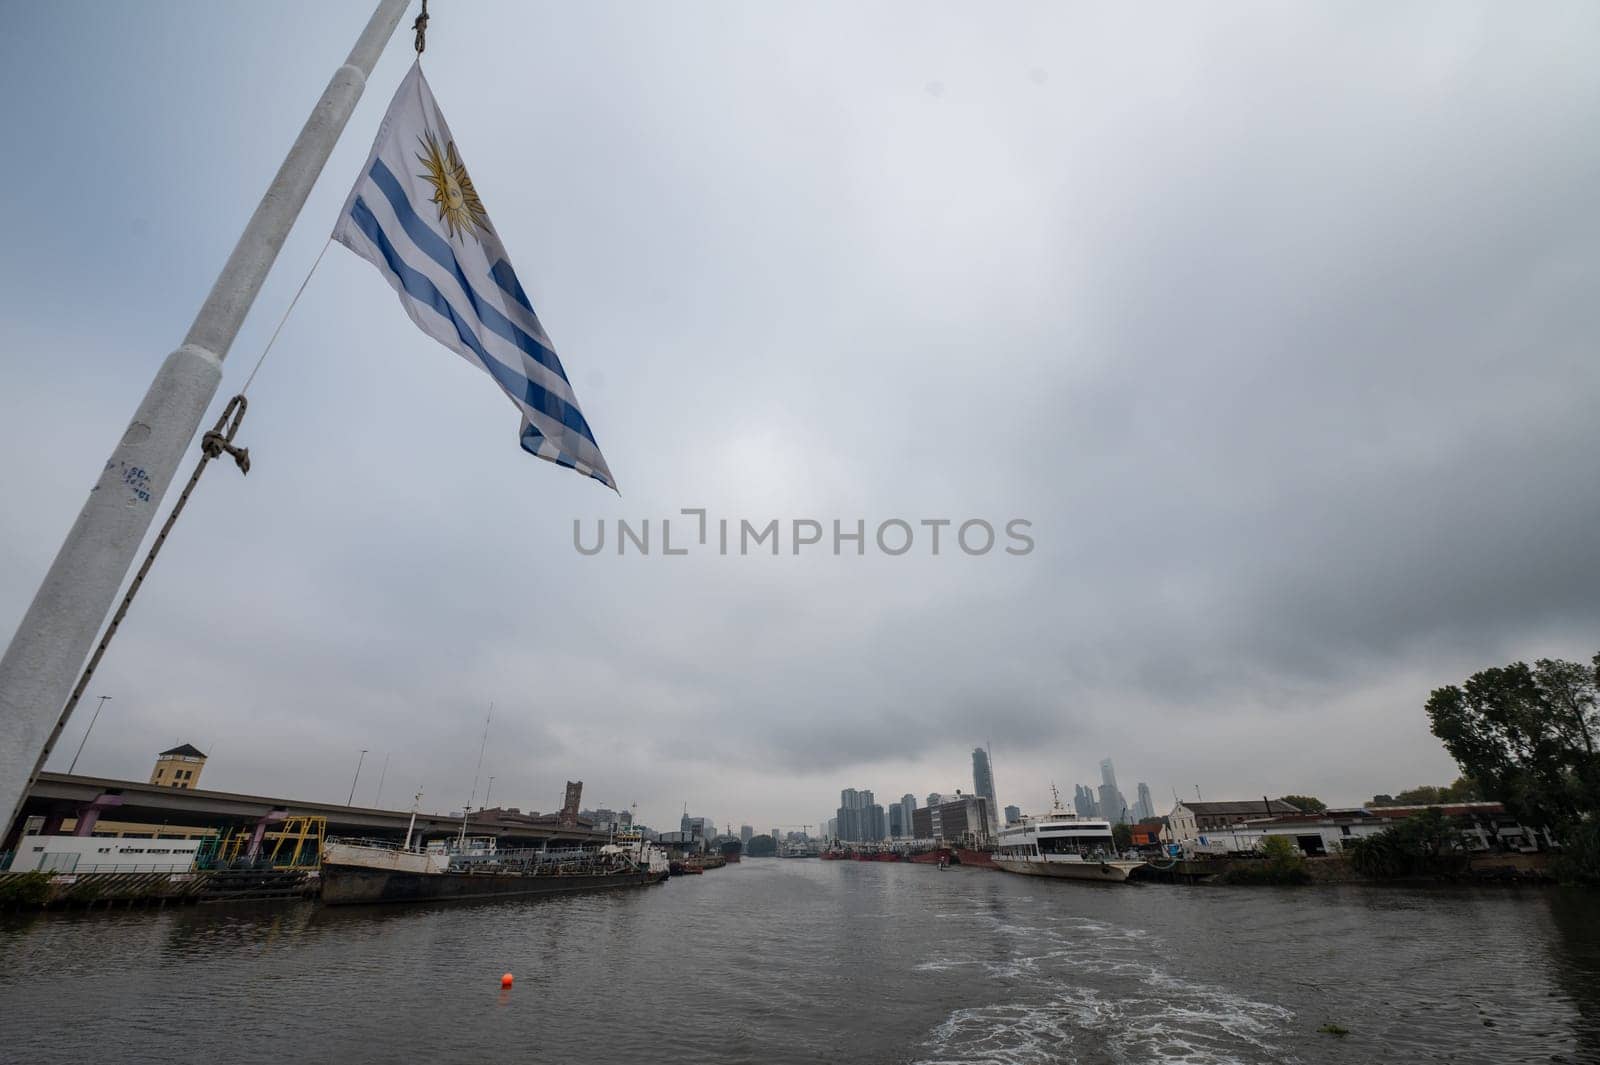 Buenos Aires, Argentina : April 21, 2023 : Uruguayan flag on the Colonia Express ship leaving the port of Buenos Aires in April 2023.